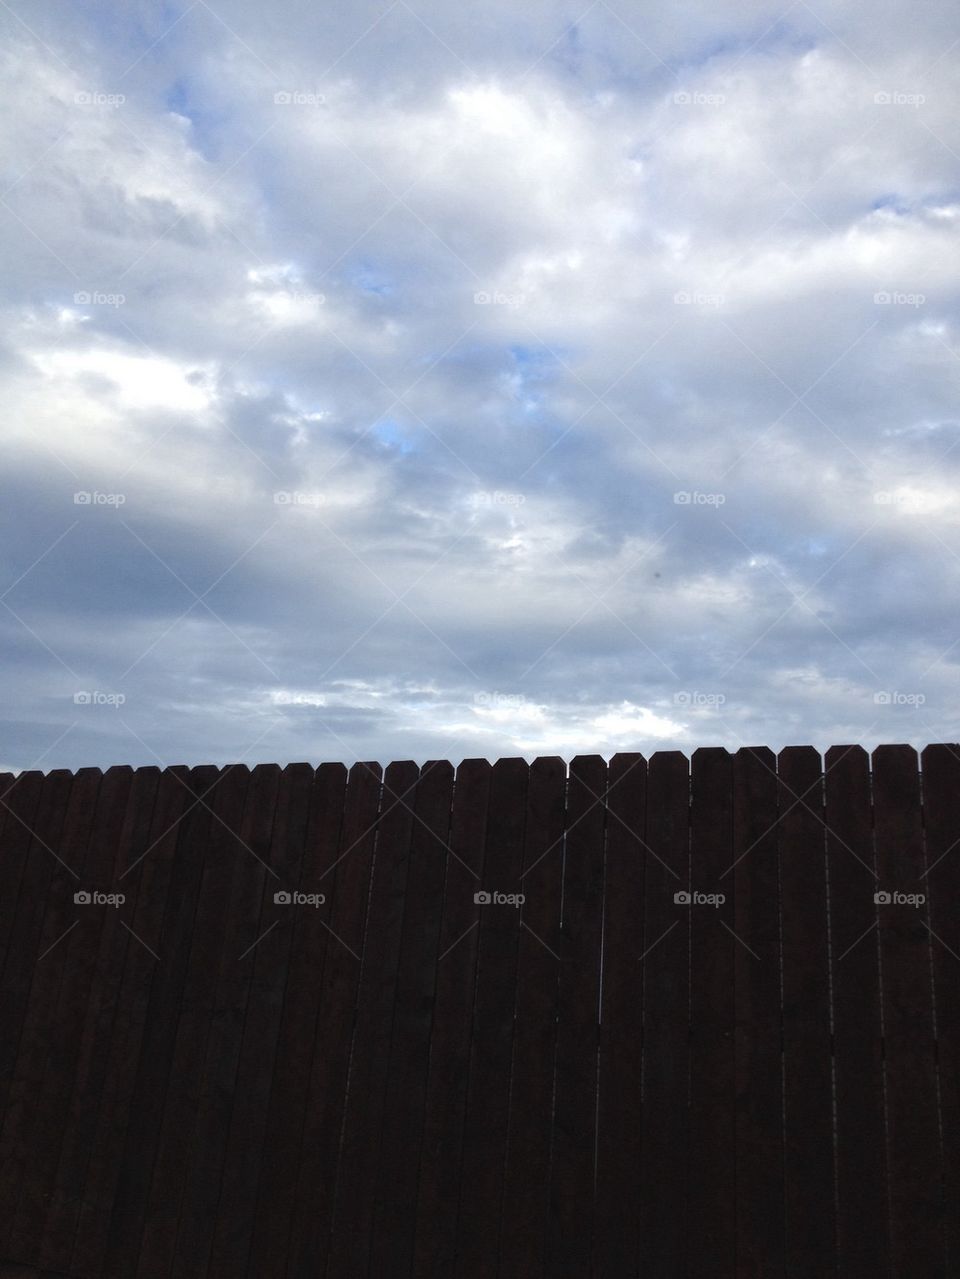 Fence and the sky